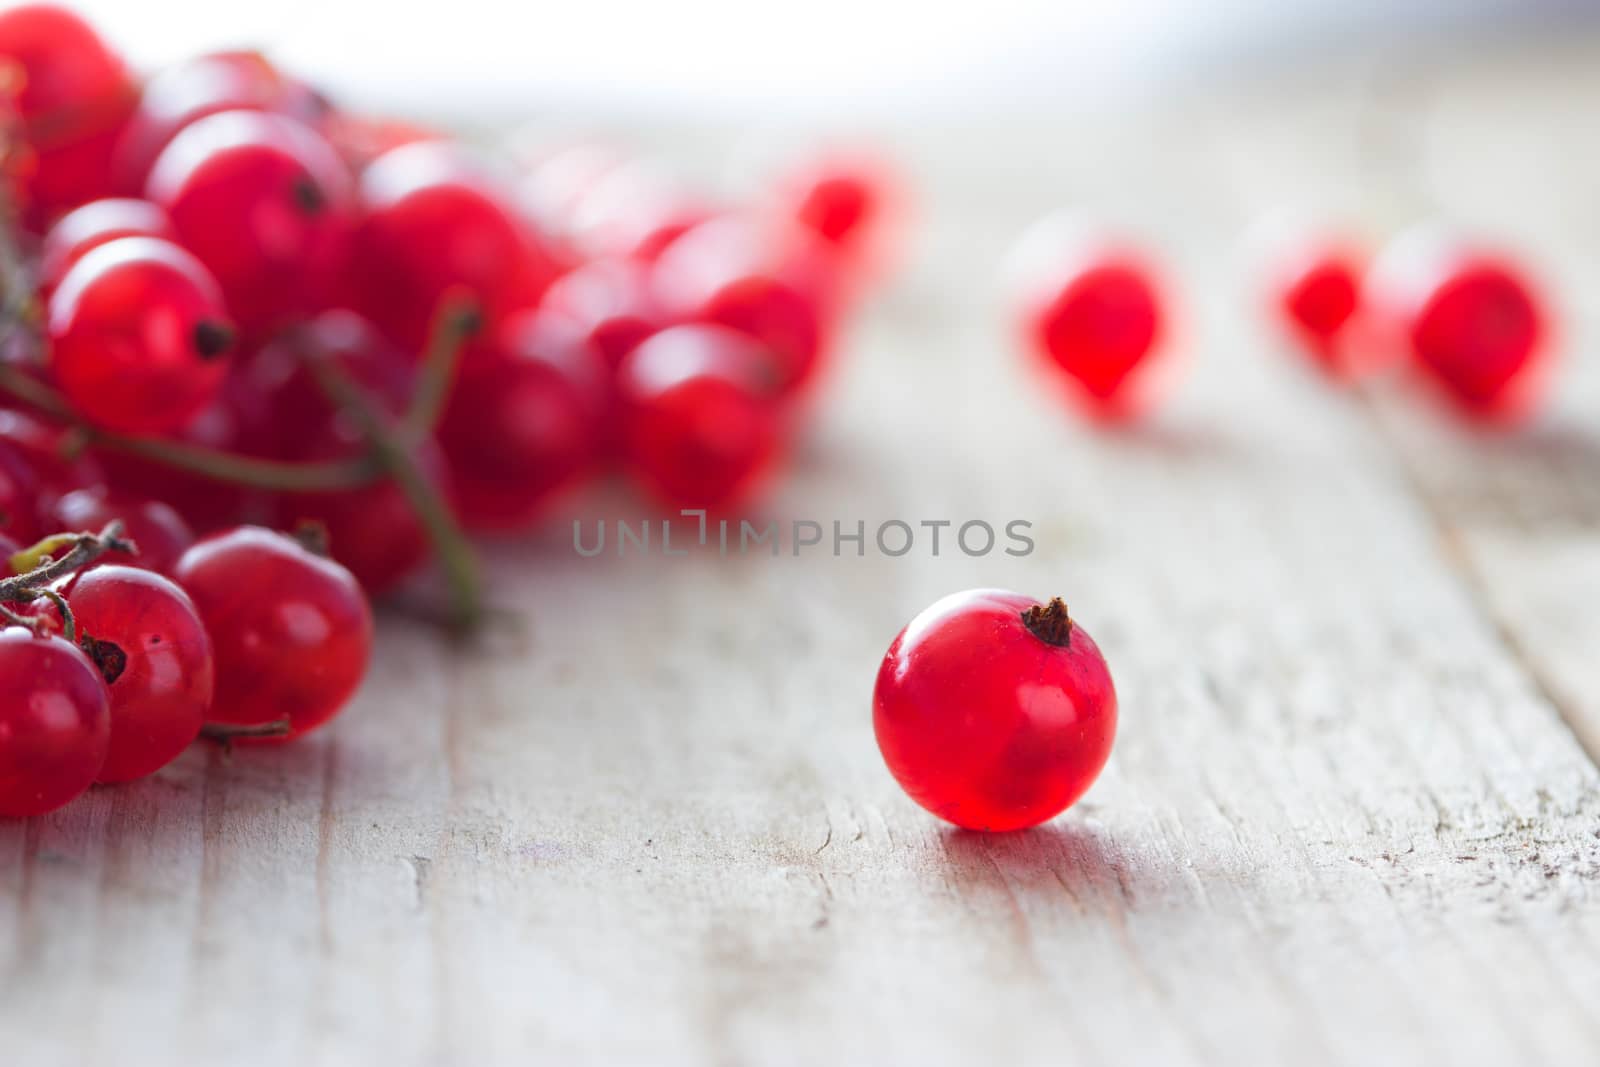 Red currants on wooden table by liwei12